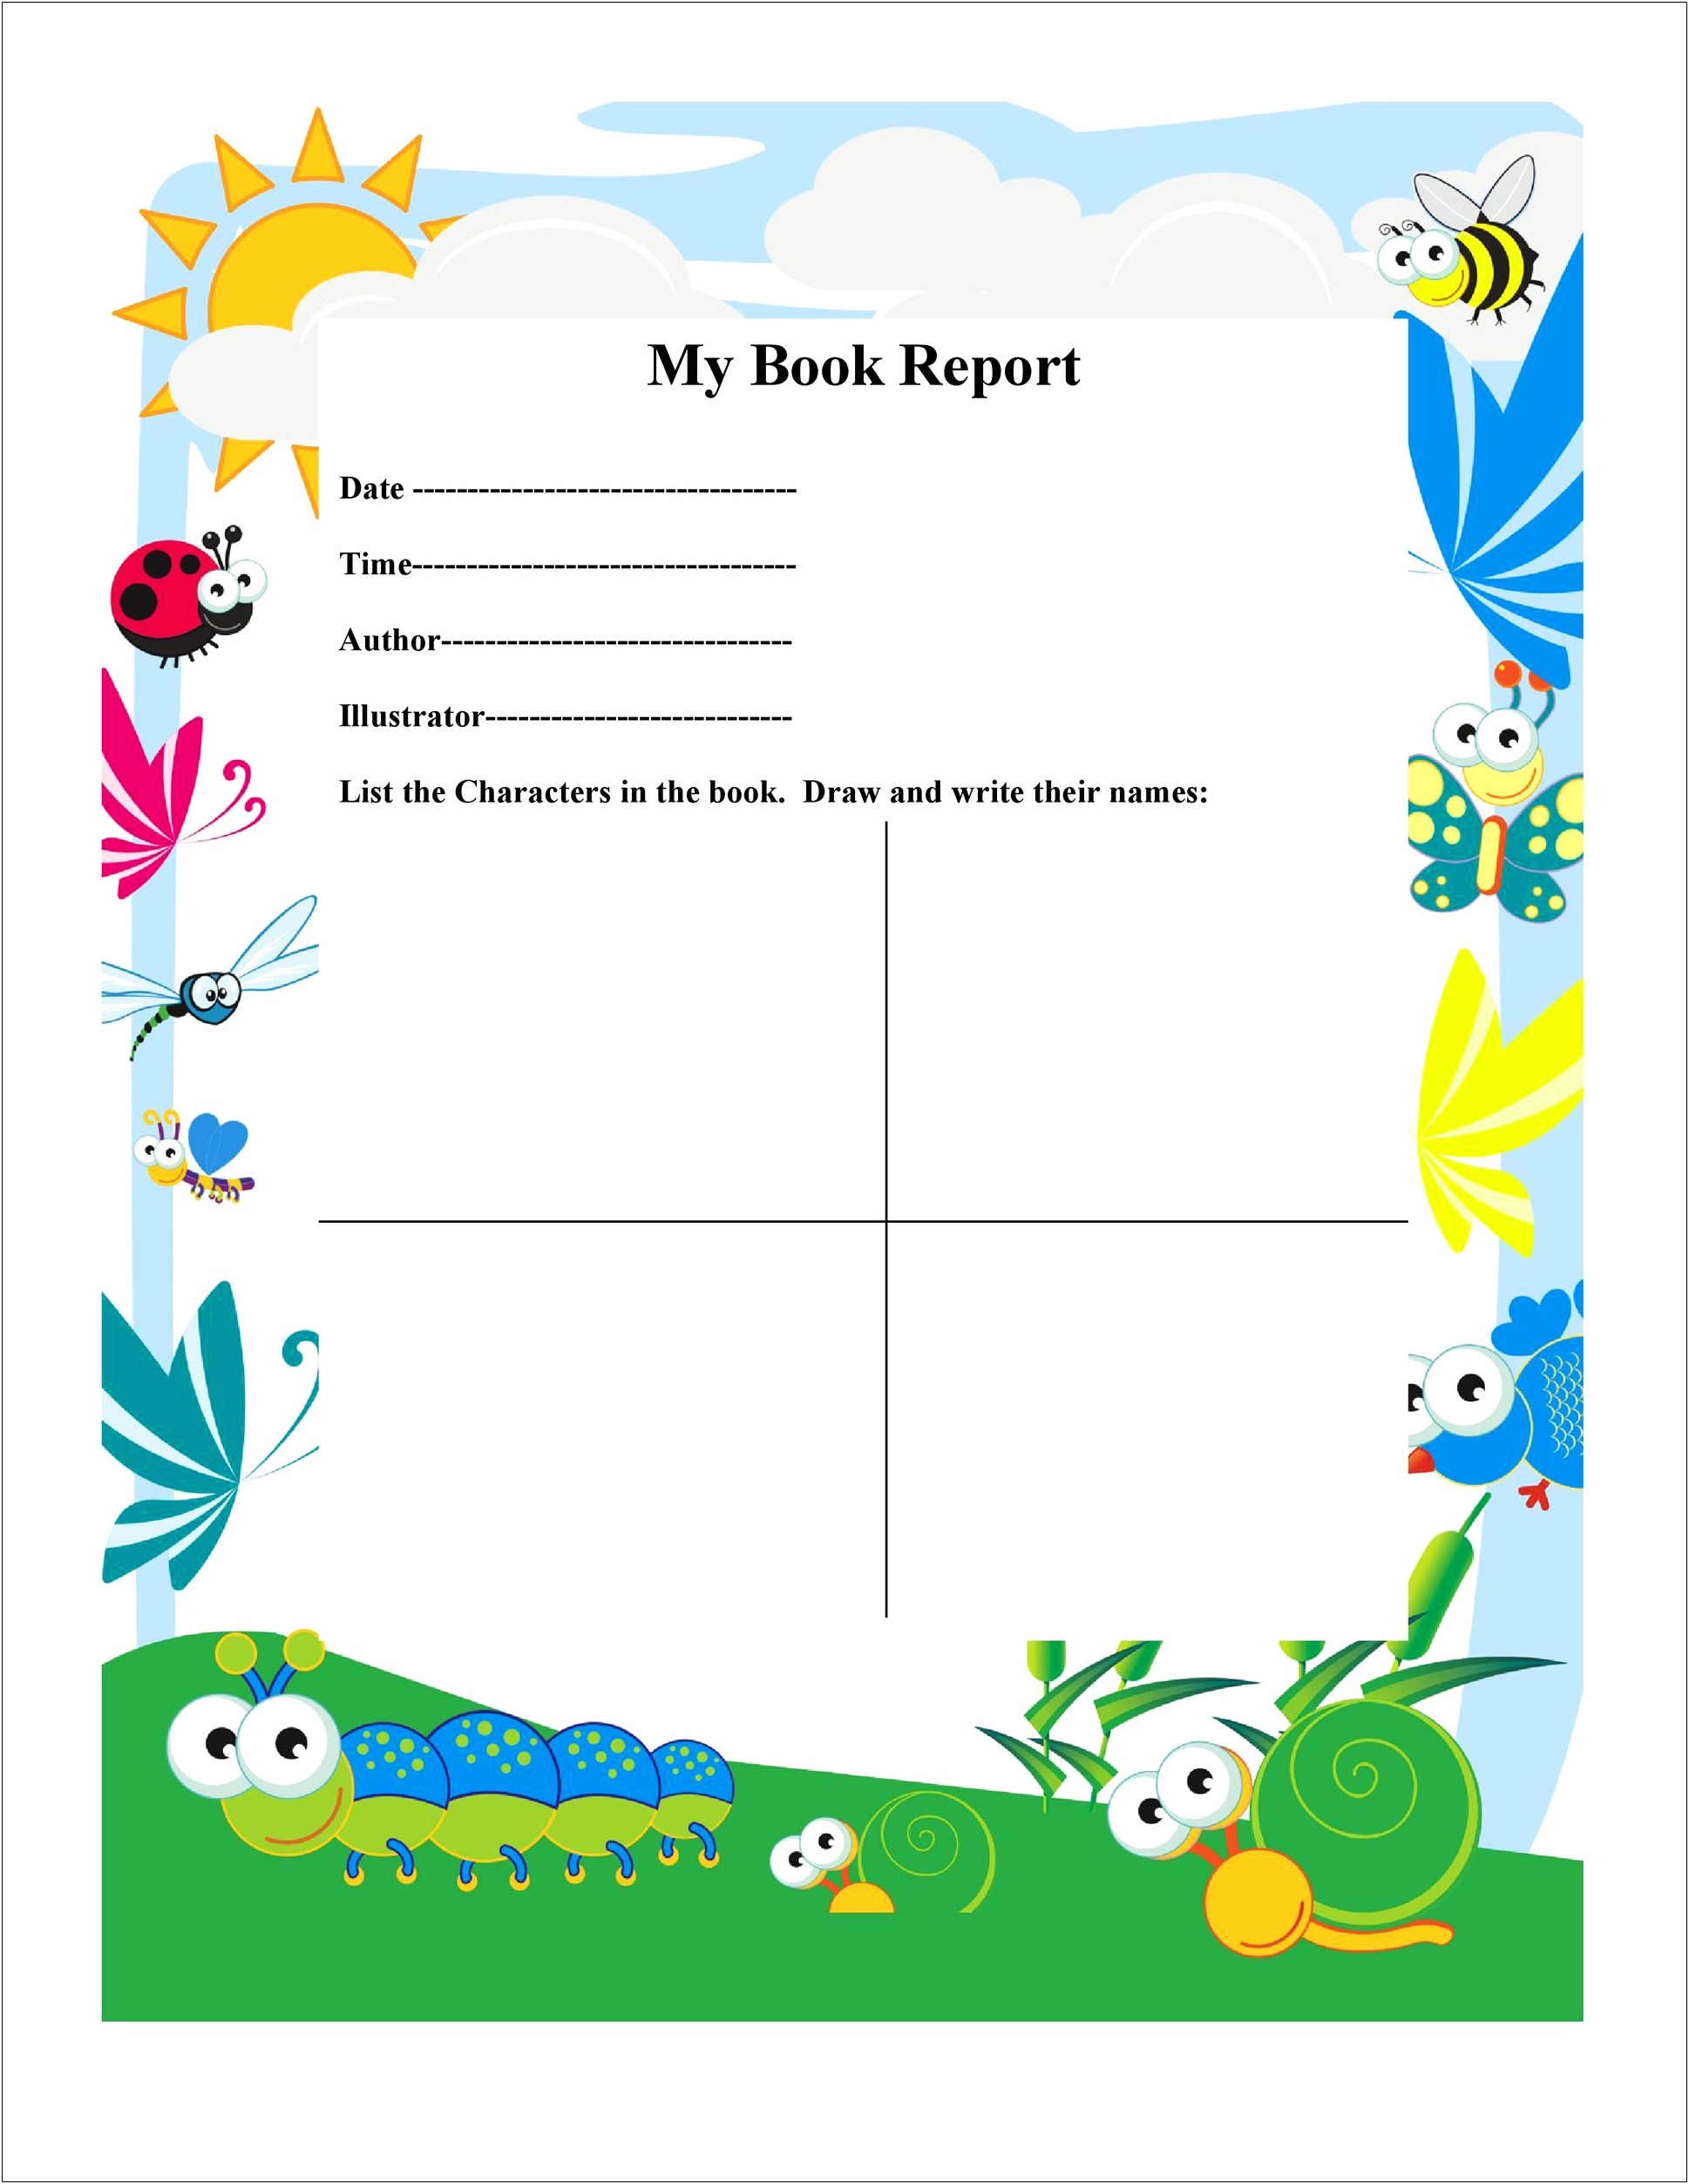 mini-book-review-template-in-2022-book-review-template-book-review-bookstagram-inspiration